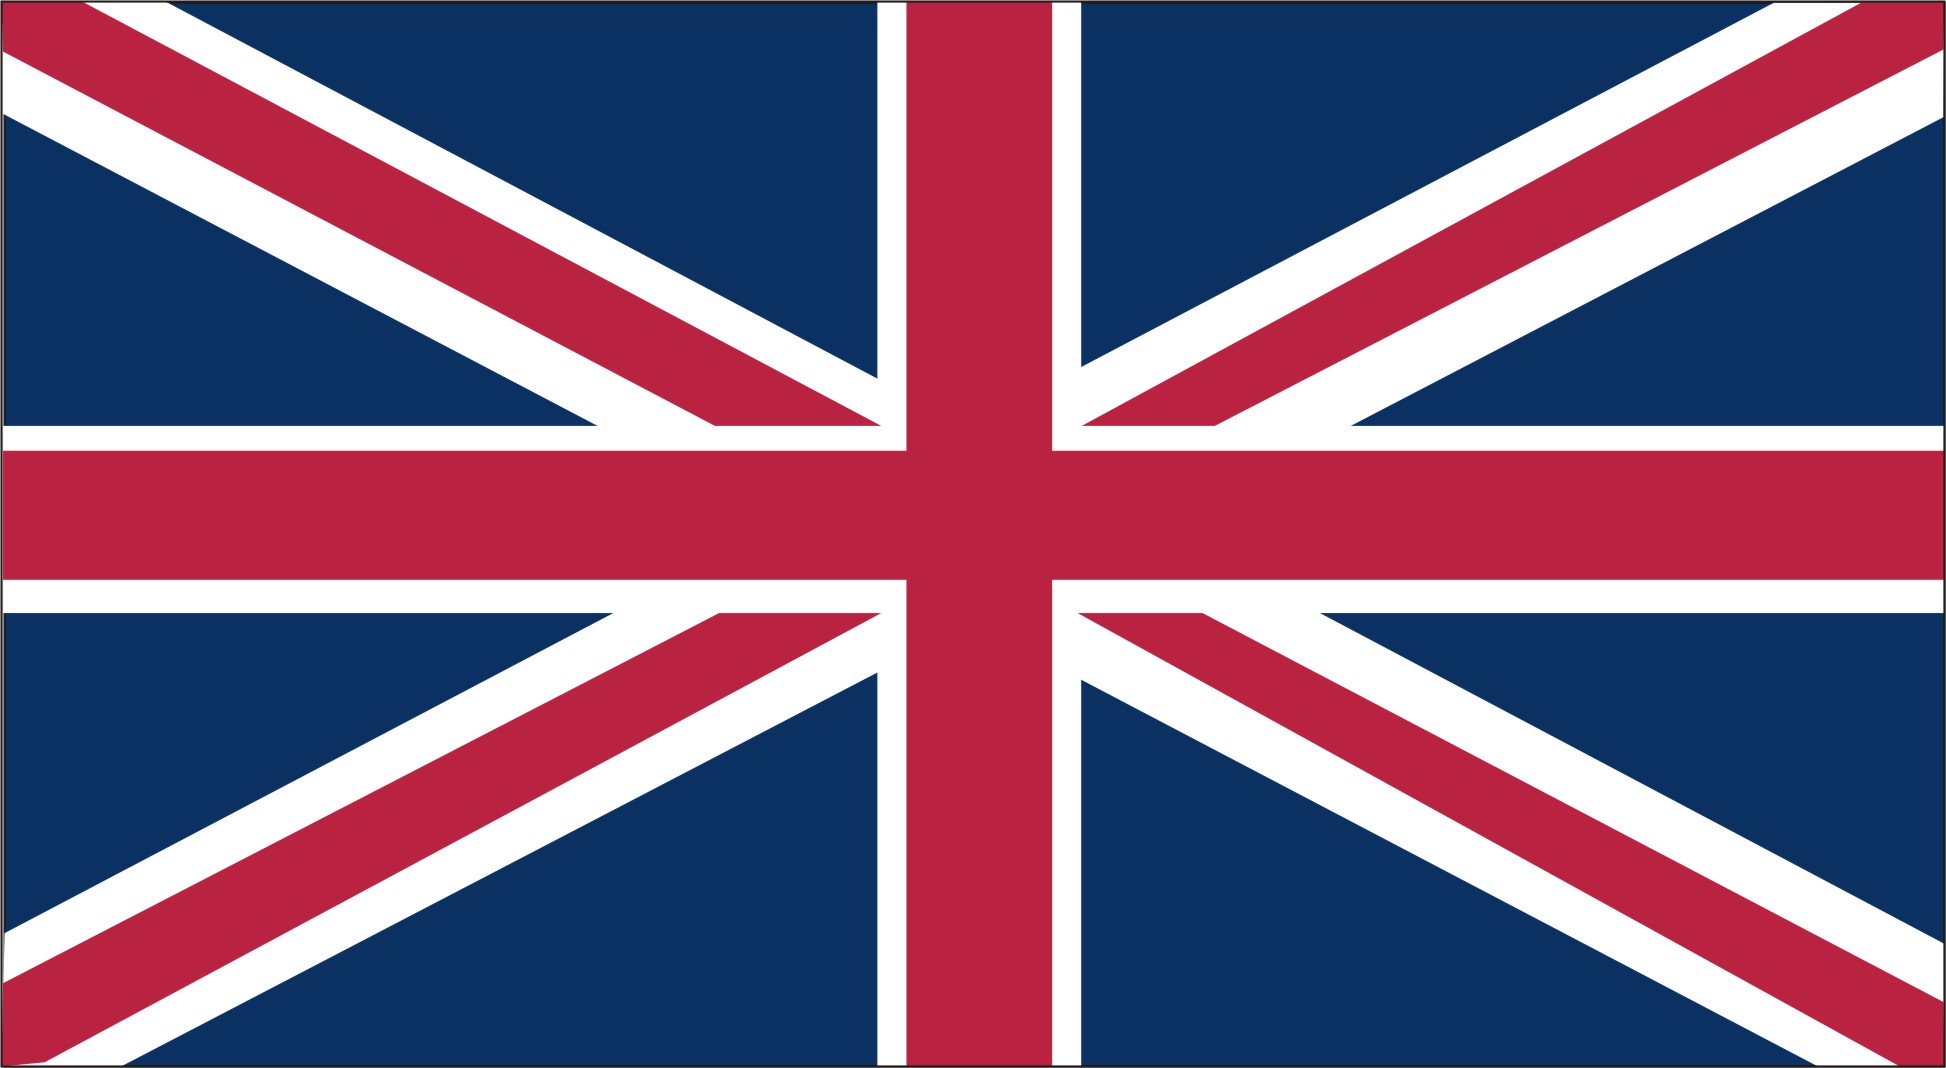   The Union Jack&nbsp;  of Great Britain  , as well as its descendant flags throughout the commonwealth,&nbsp;"make&nbsp;reference to three Christian patron saints: the patron saint of England, represented by the red cross of Saint George, the patron